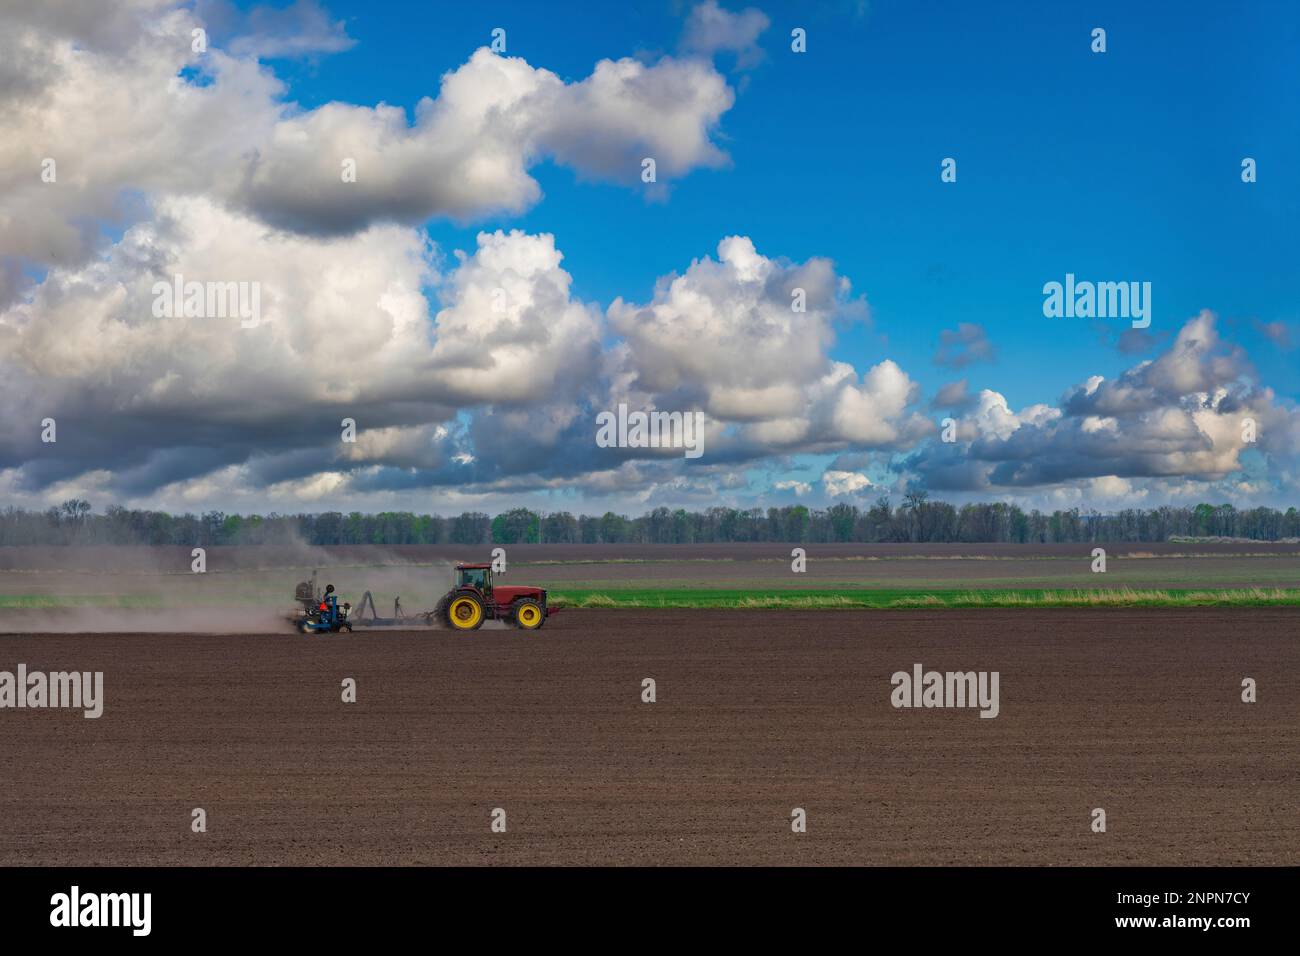 Red tractor plows the farm field. Vibrant spring countryside scene. Agriculture industry. Stock Photo